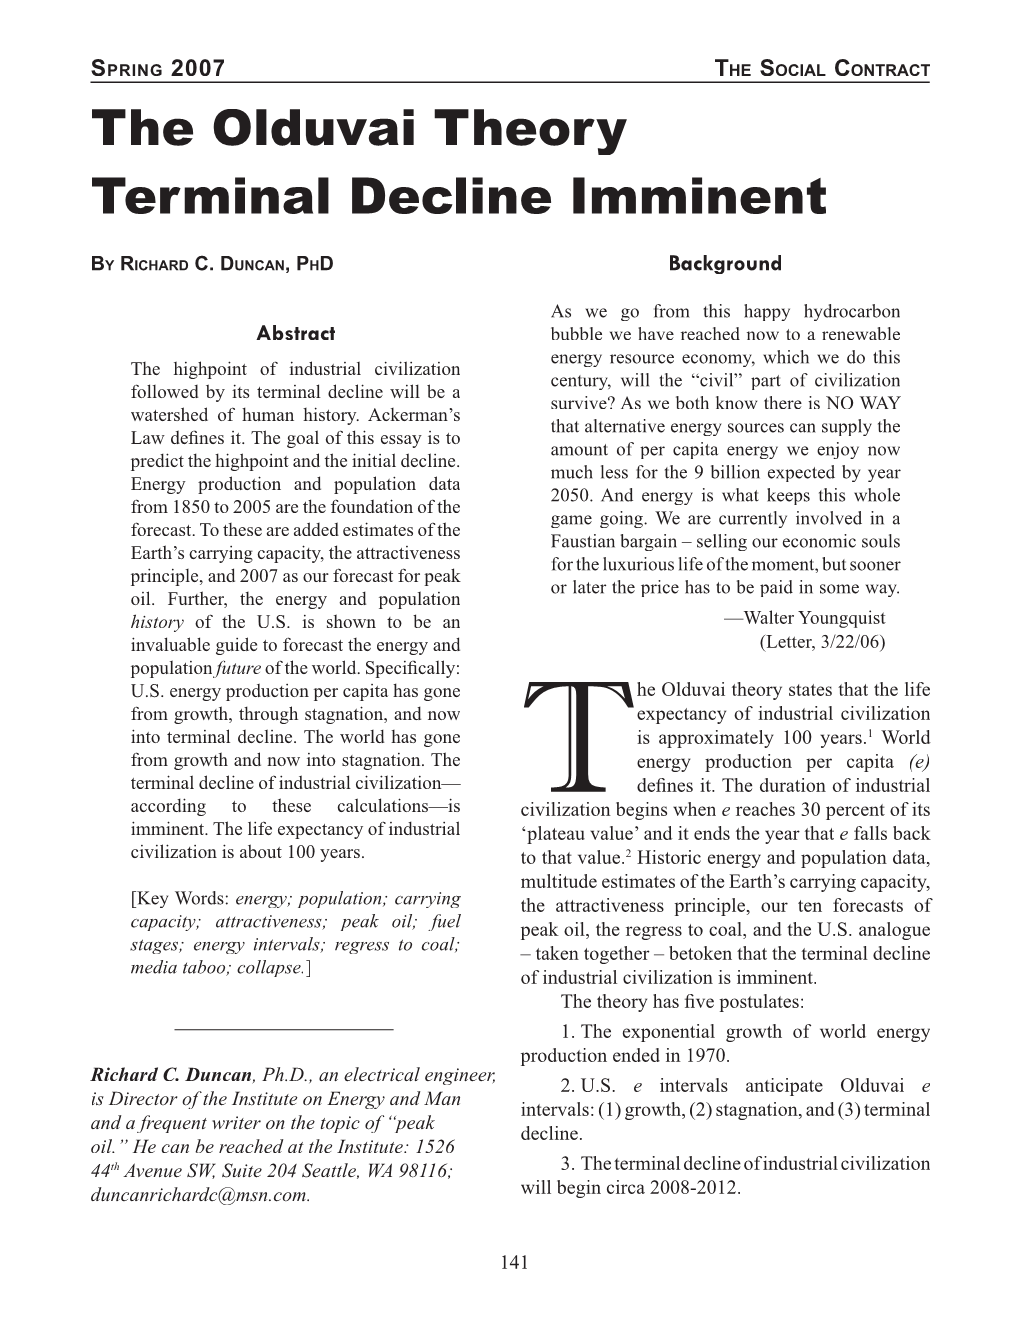 The Olduvai Theory Terminal Decline Imminent